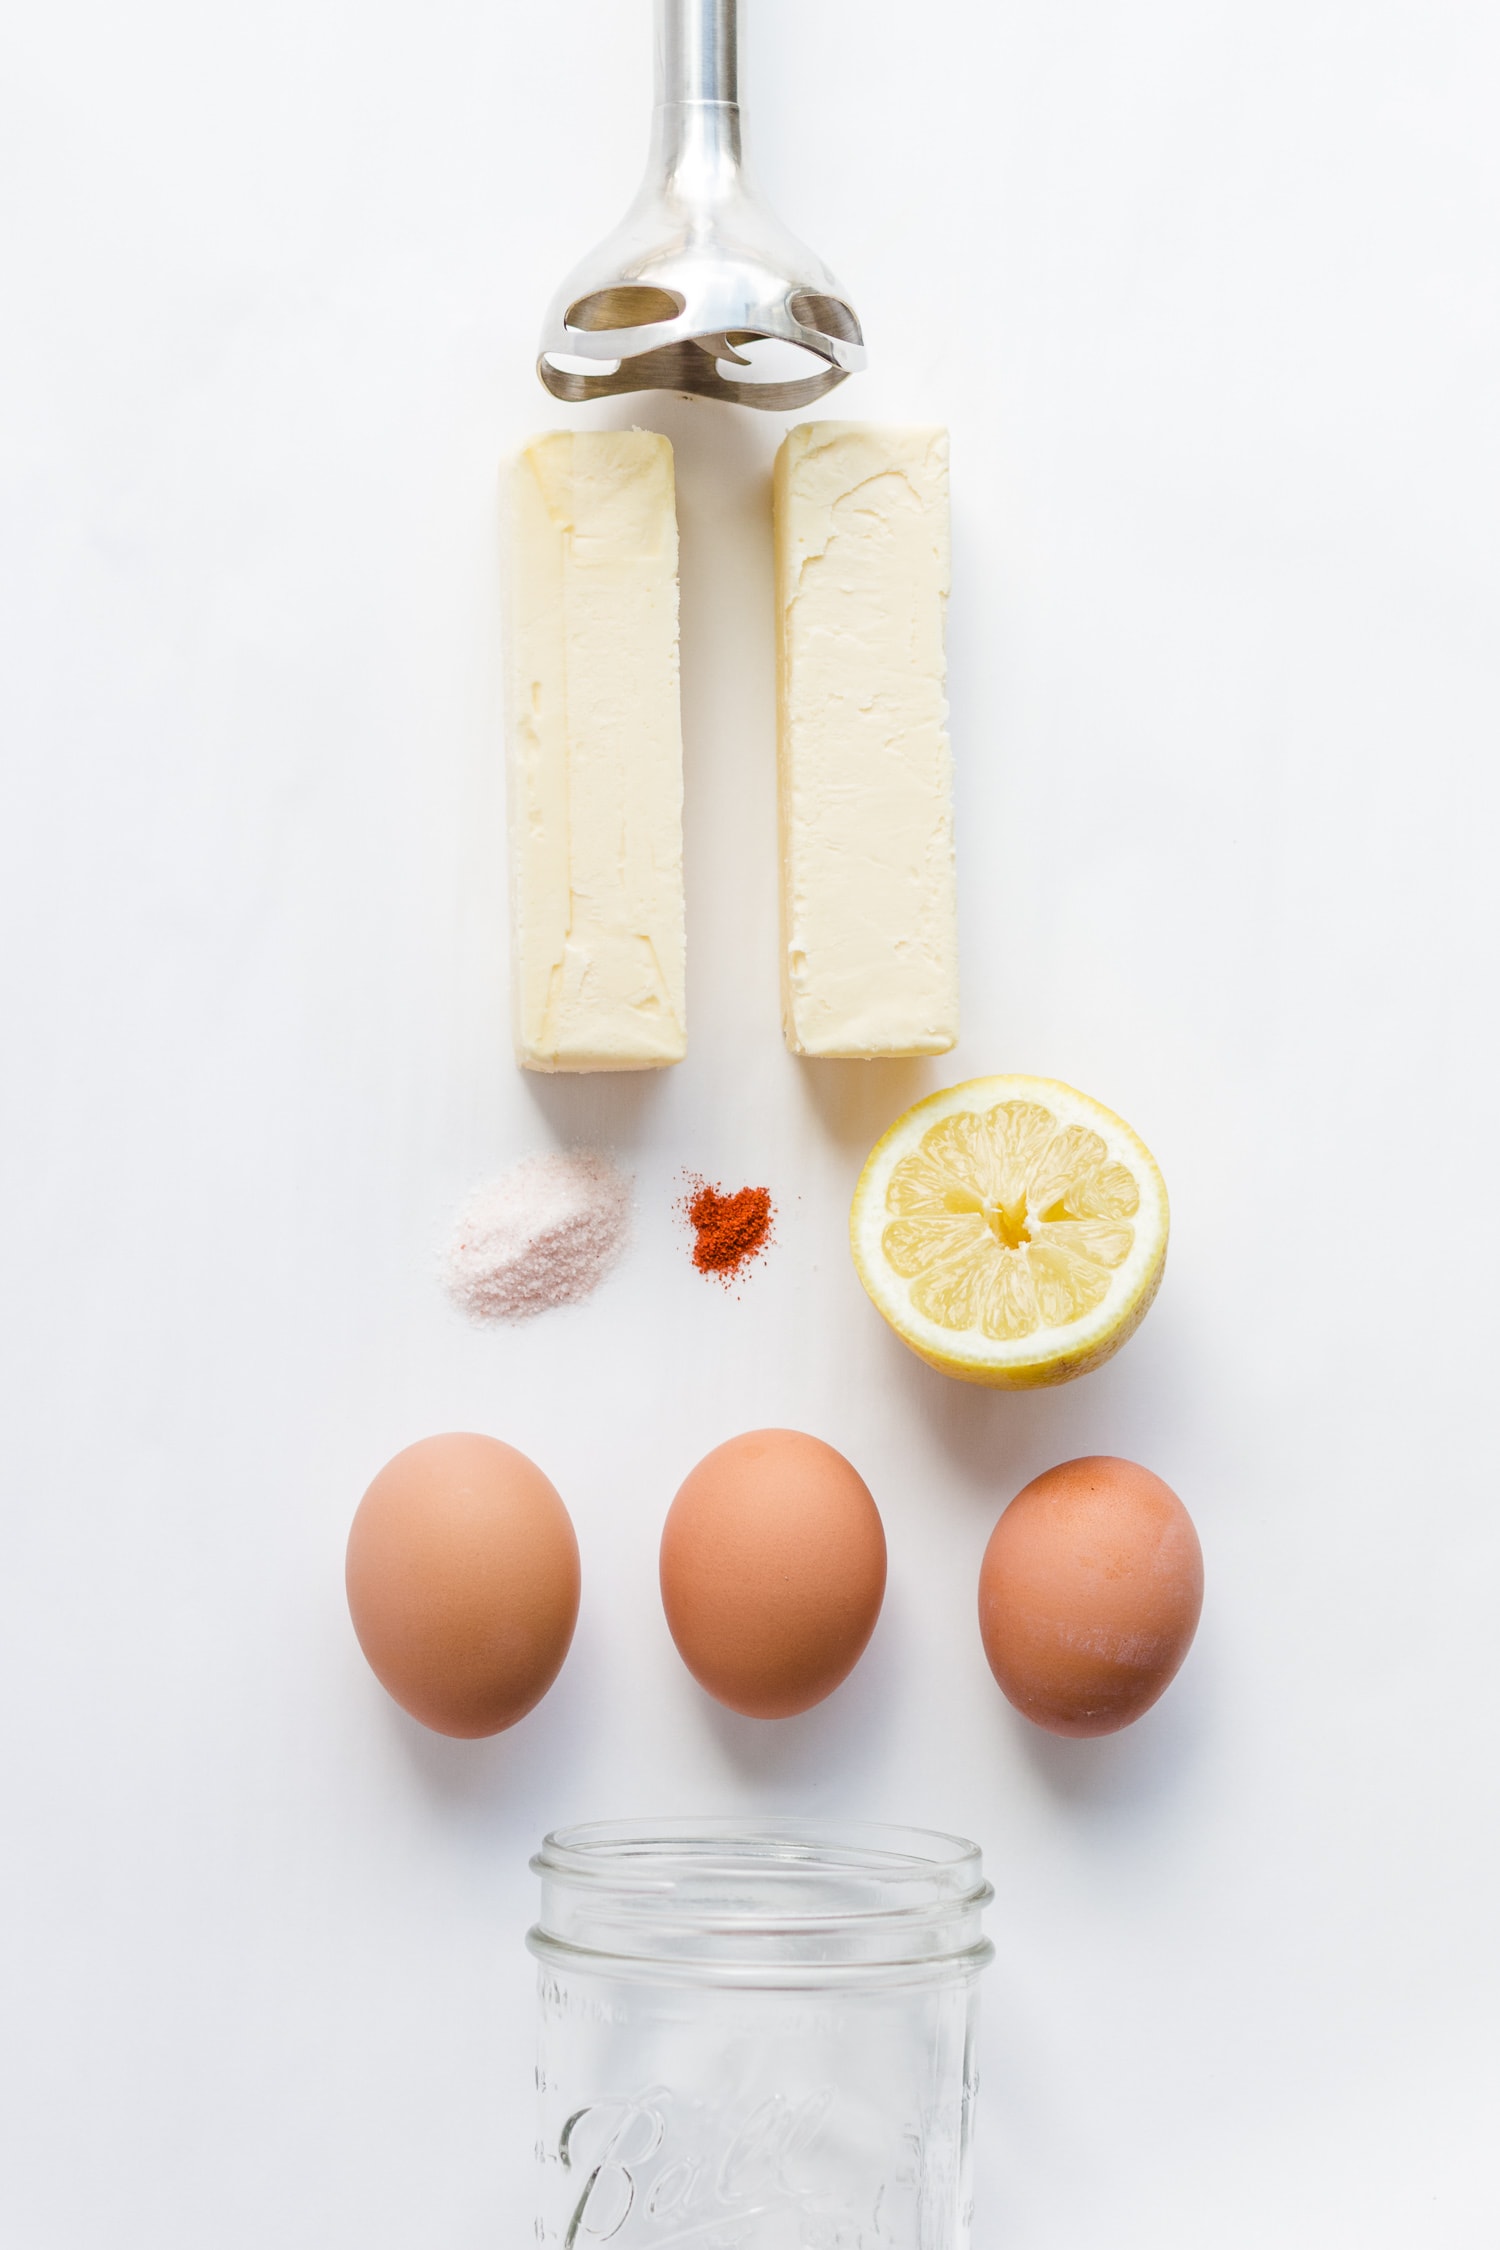 An overhead photo of ingredients needed for hollandaise sauce.